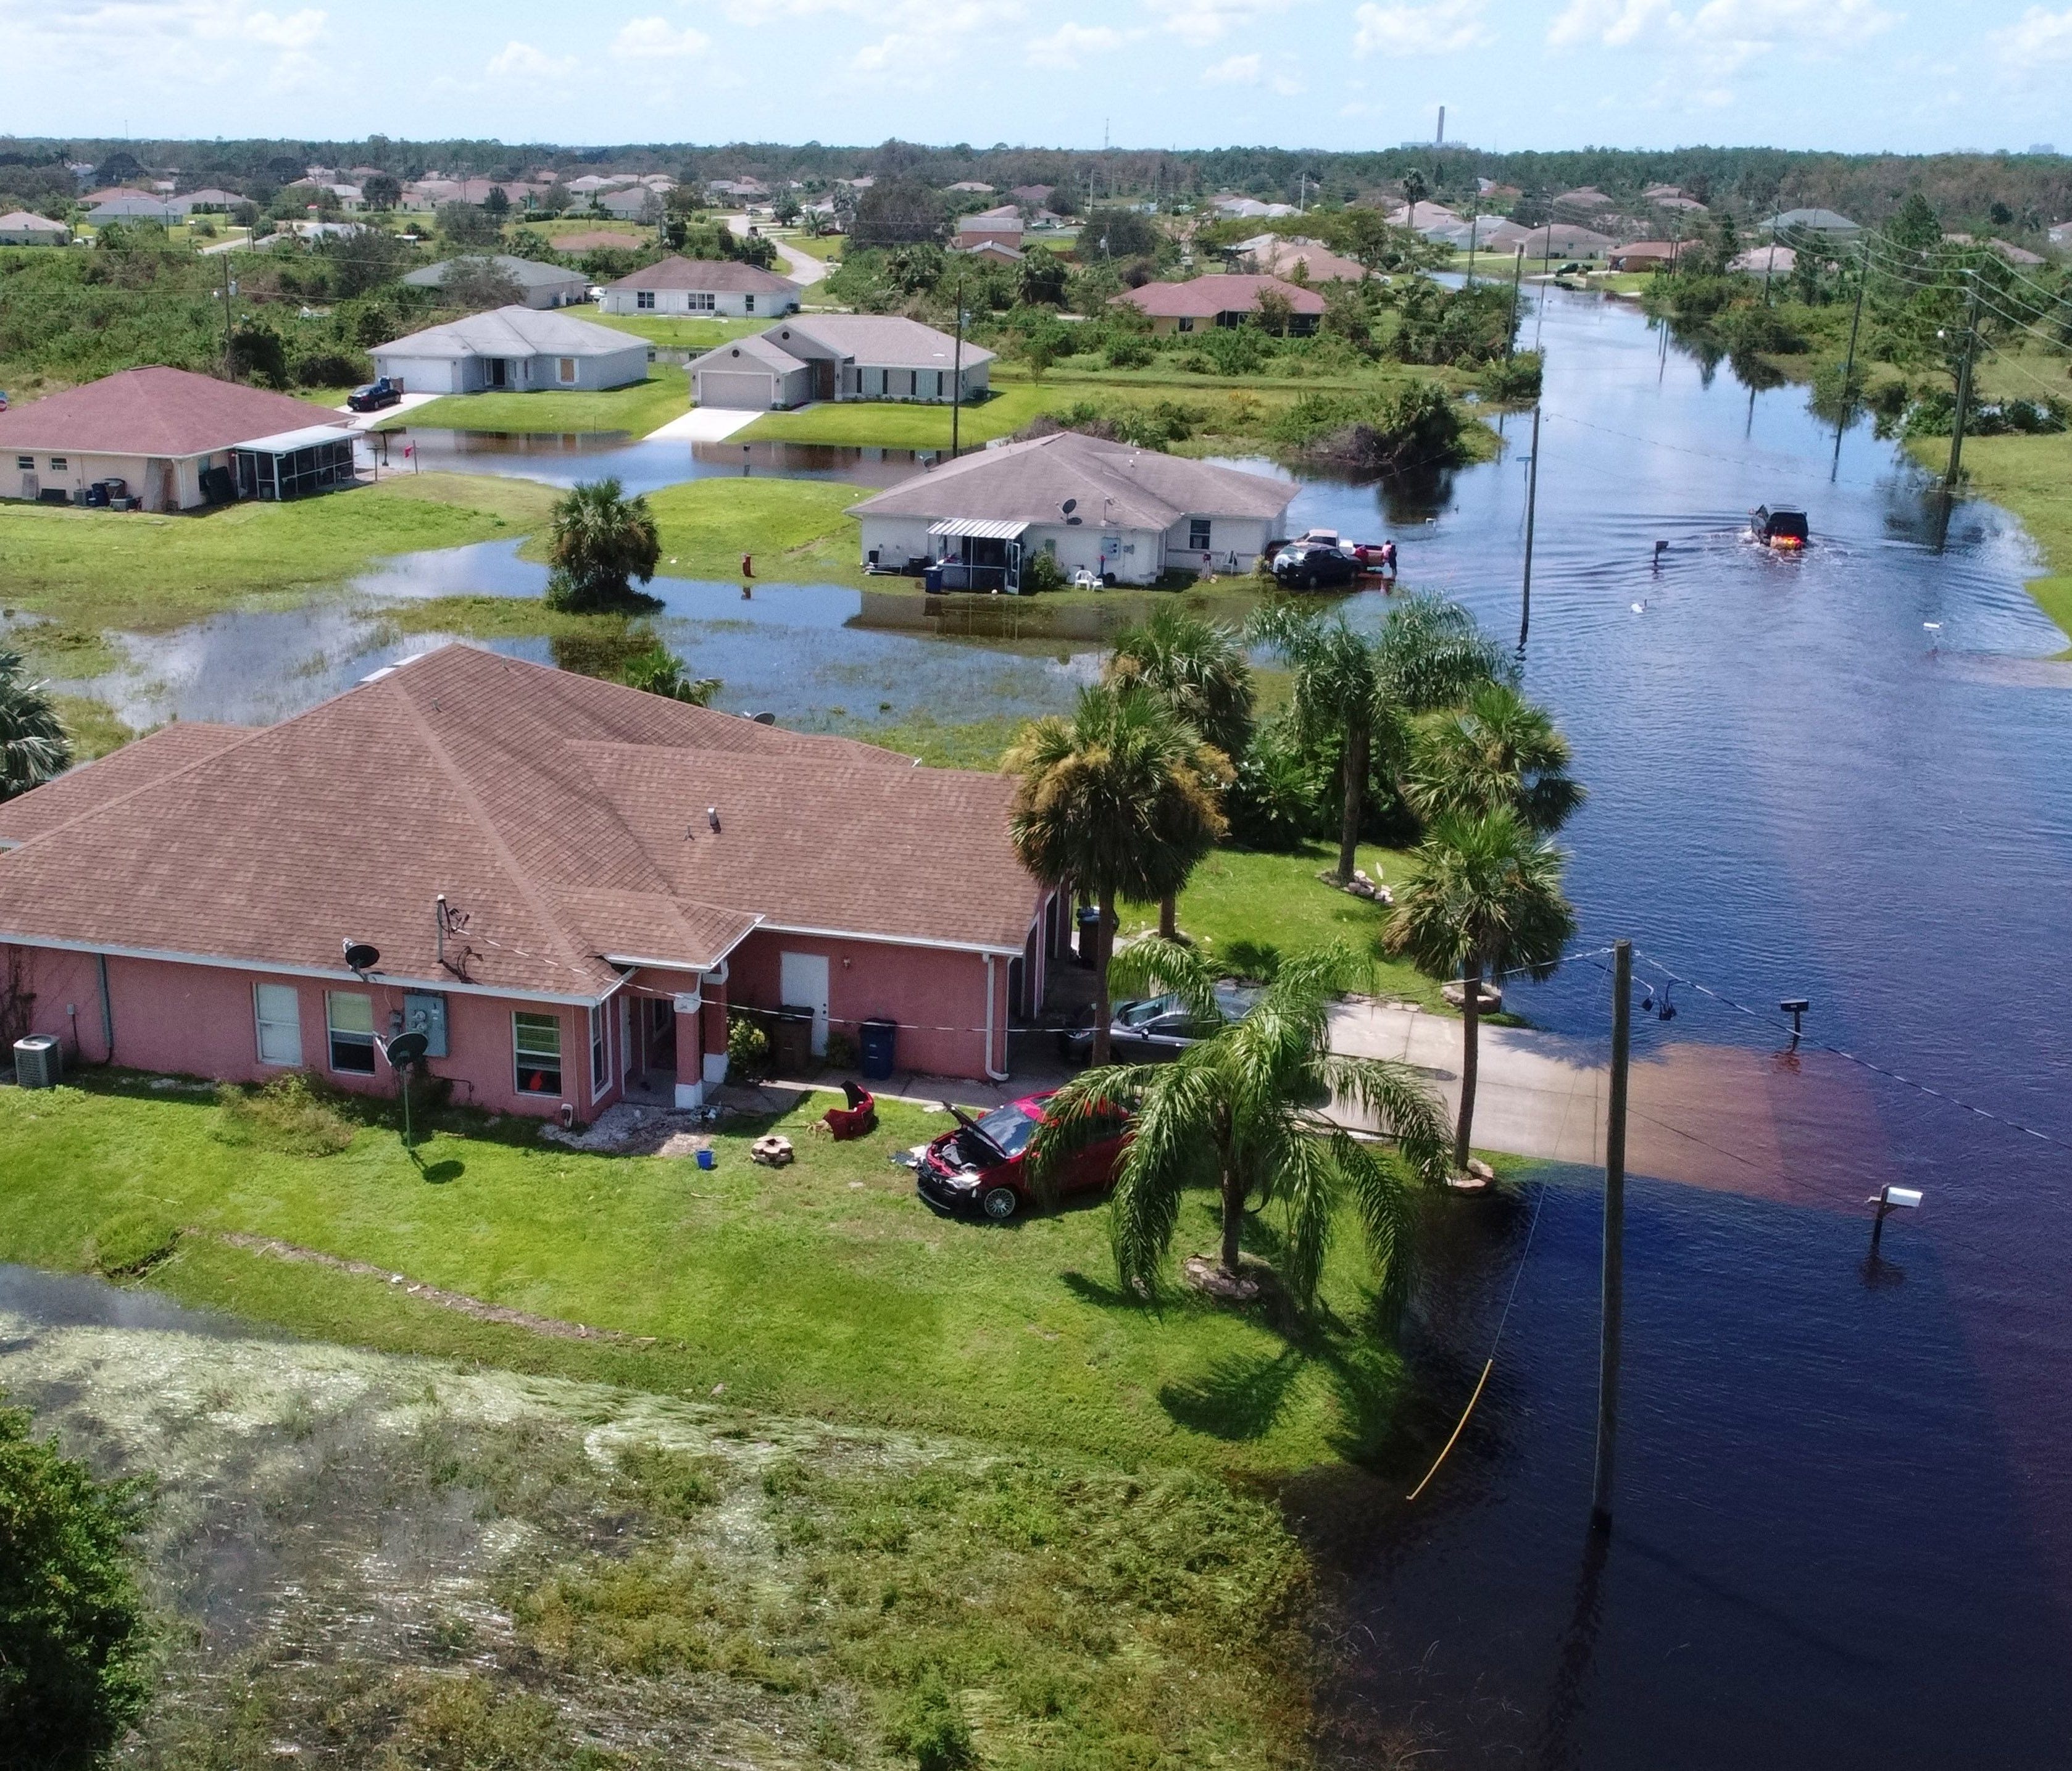 Homes are turned into islands Sept. 12, two days after hurricane Irma passed through the Lehigh Acres area outside Fort Myers, Fla.